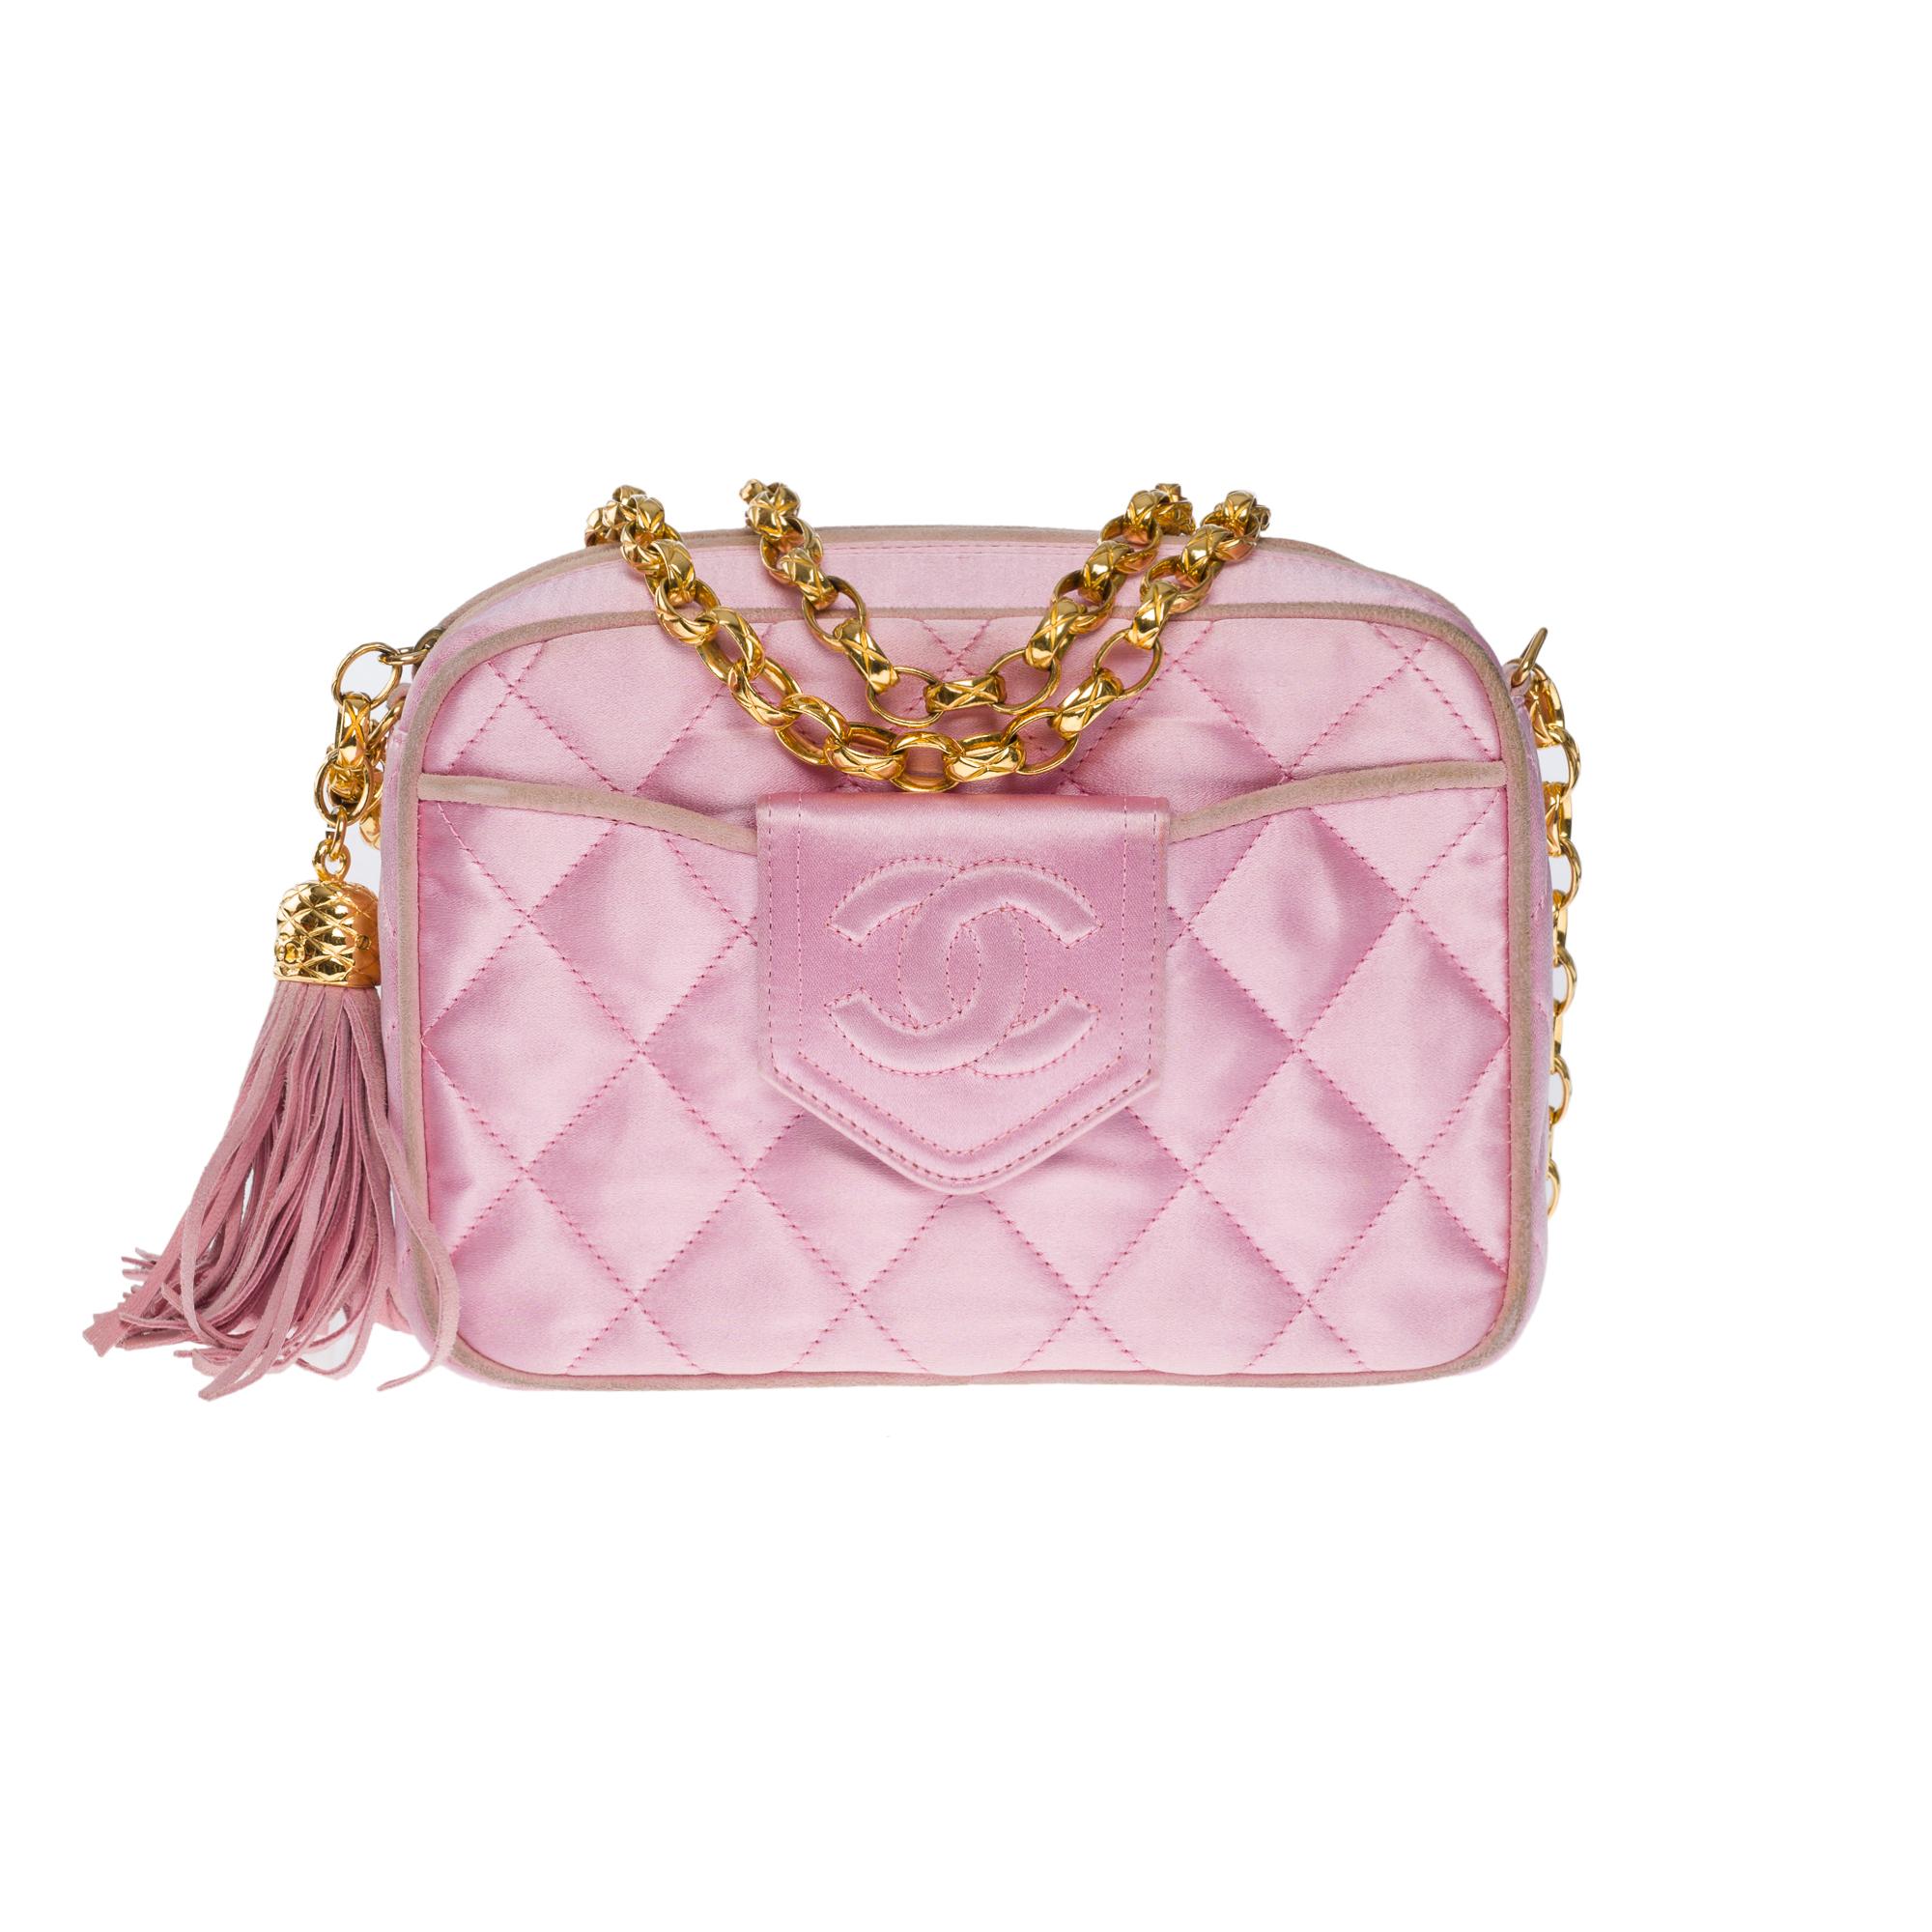 Lovely Chanel Mini Camera Front Pocket shoulder bag from the “Coco Crush” collection in satin and pink suede beads, gold metal hardware, a gold metal chain for a shoulder and crossbody carry
Zip closure with pink leather tassel fringe
A pocket at